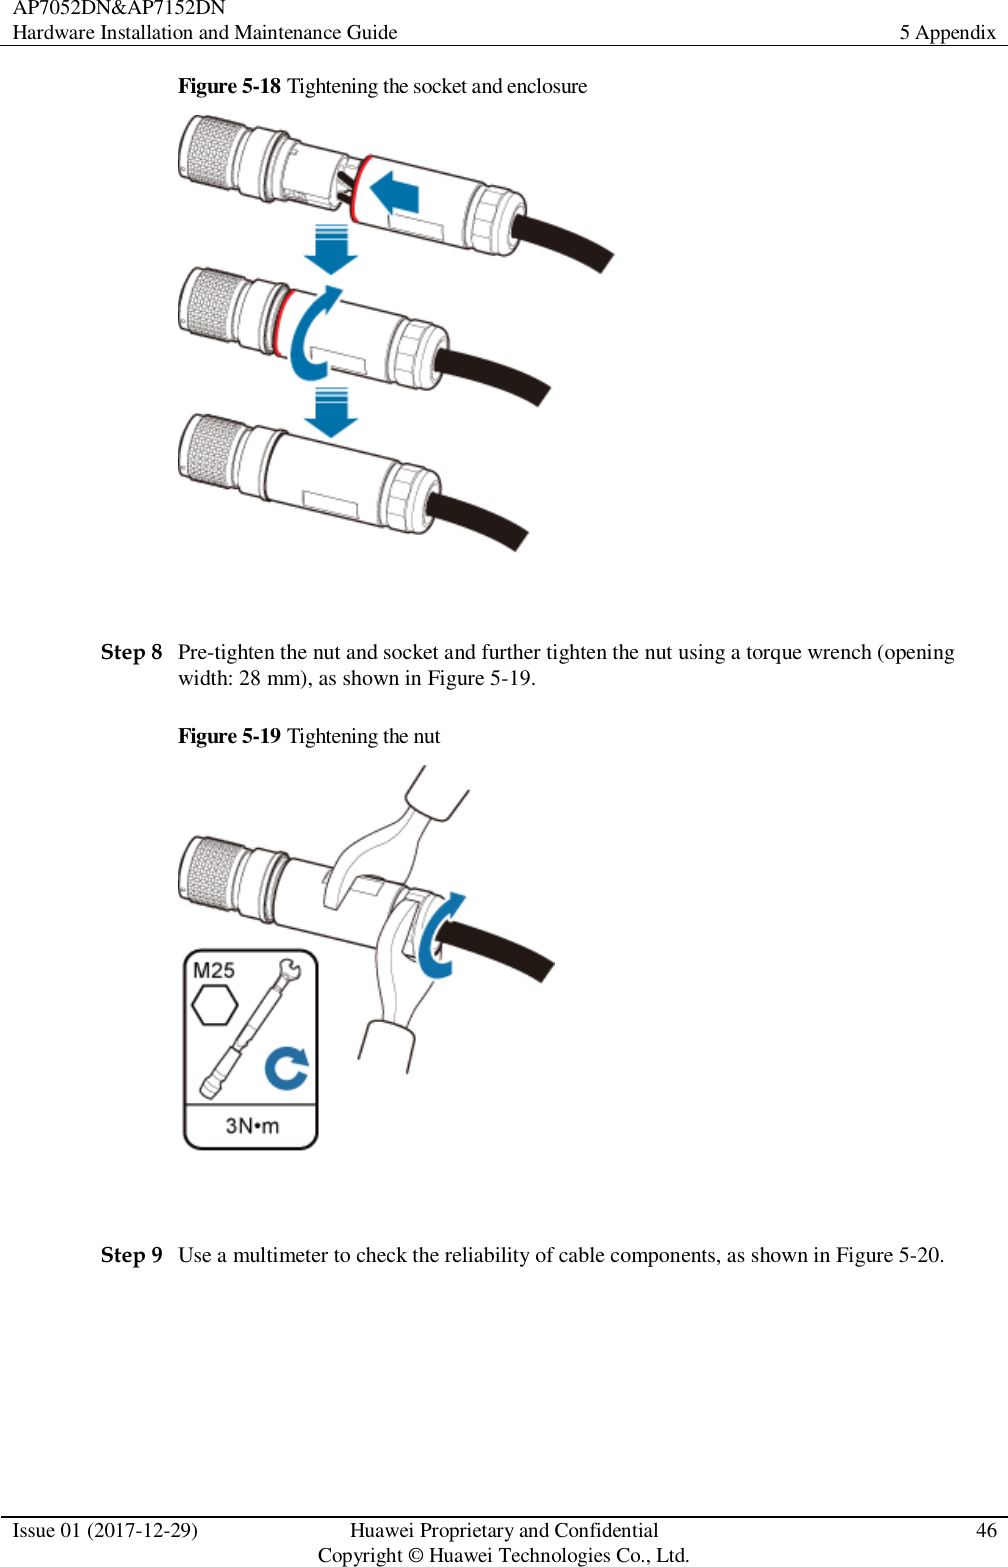 AP7052DN&amp;AP7152DN Hardware Installation and Maintenance Guide 5 Appendix  Issue 01 (2017-12-29) Huawei Proprietary and Confidential                                     Copyright © Huawei Technologies Co., Ltd. 46  Figure 5-18 Tightening the socket and enclosure   Step 8 Pre-tighten the nut and socket and further tighten the nut using a torque wrench (opening width: 28 mm), as shown in Figure 5-19. Figure 5-19 Tightening the nut   Step 9 Use a multimeter to check the reliability of cable components, as shown in Figure 5-20. 